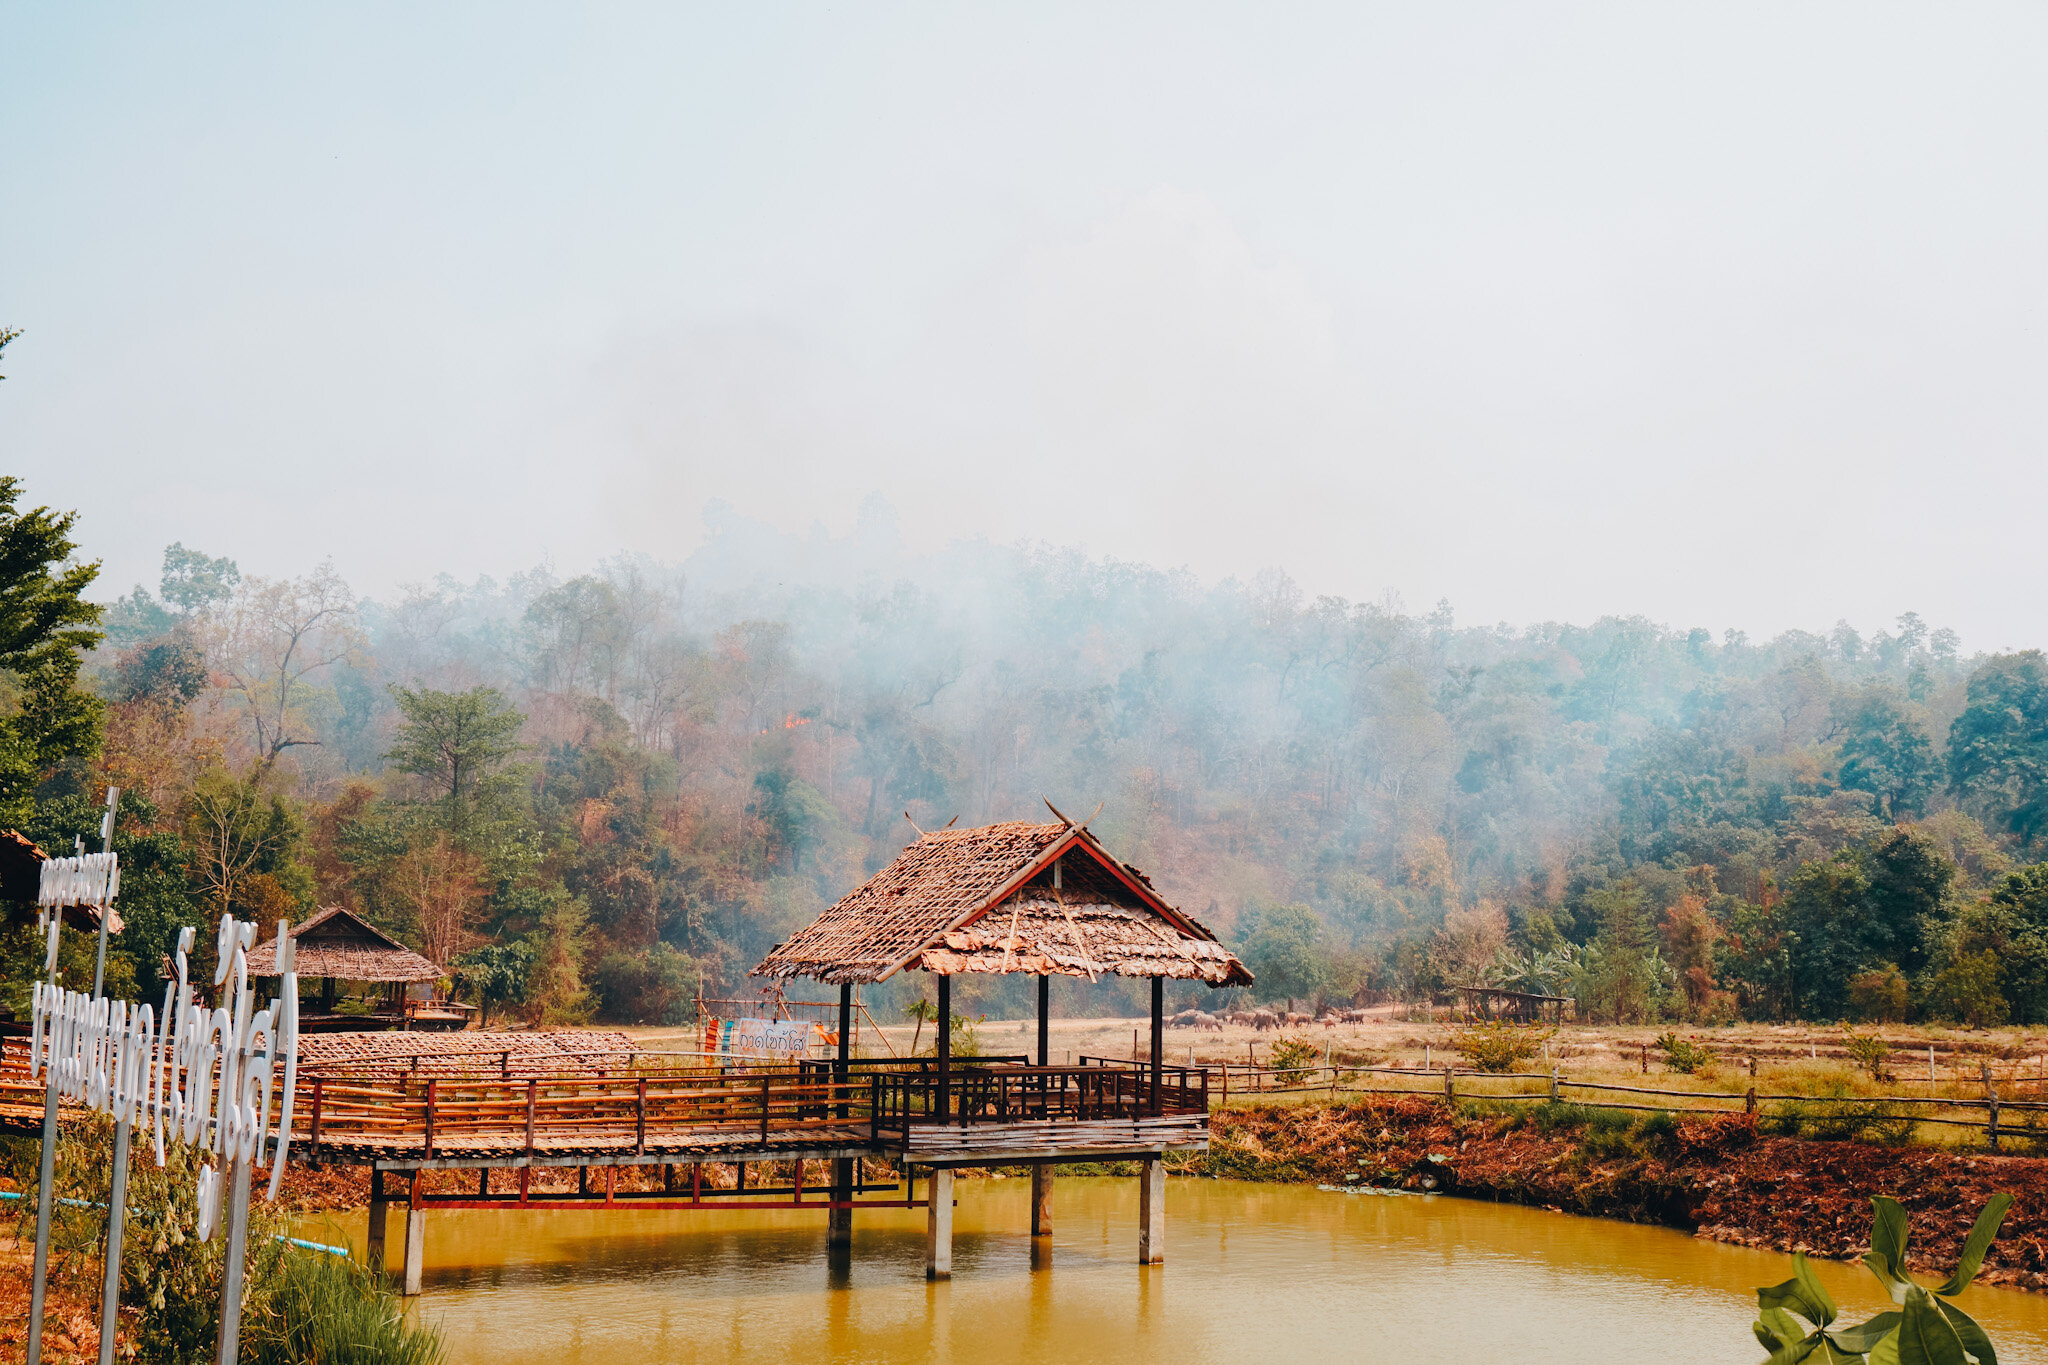 In the north of Thailand, forest fires cover the mountains and towns in a thick blanket of smoke. 

As I drive along the road, ash fills the air and the ground on either side of me is scorched black.

🌾 Each and every year, this happens. The farmers